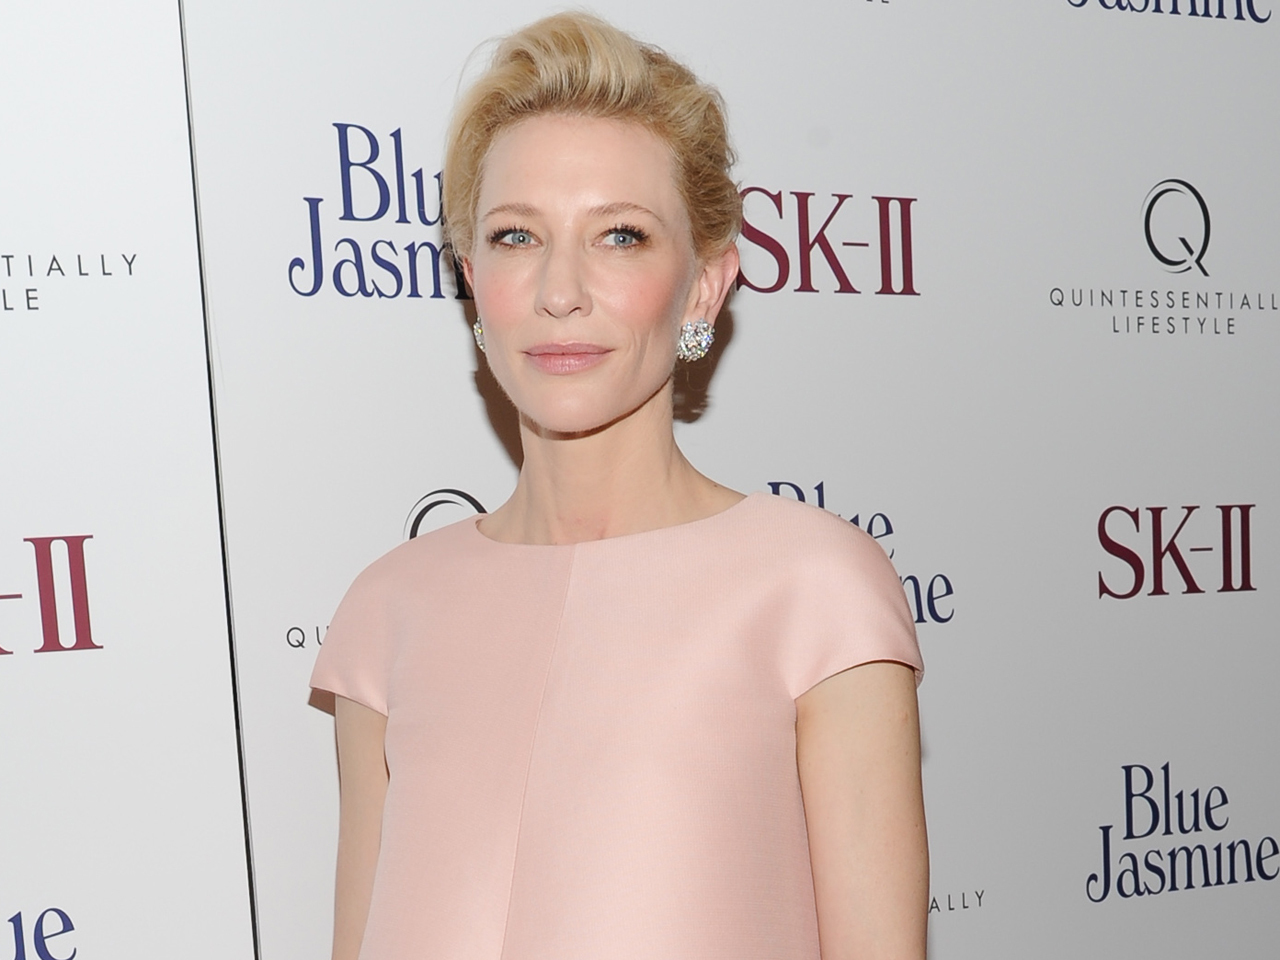 Cate Blanchett Said 'Yes' to 'Blue Jasmine' Before Reading Script